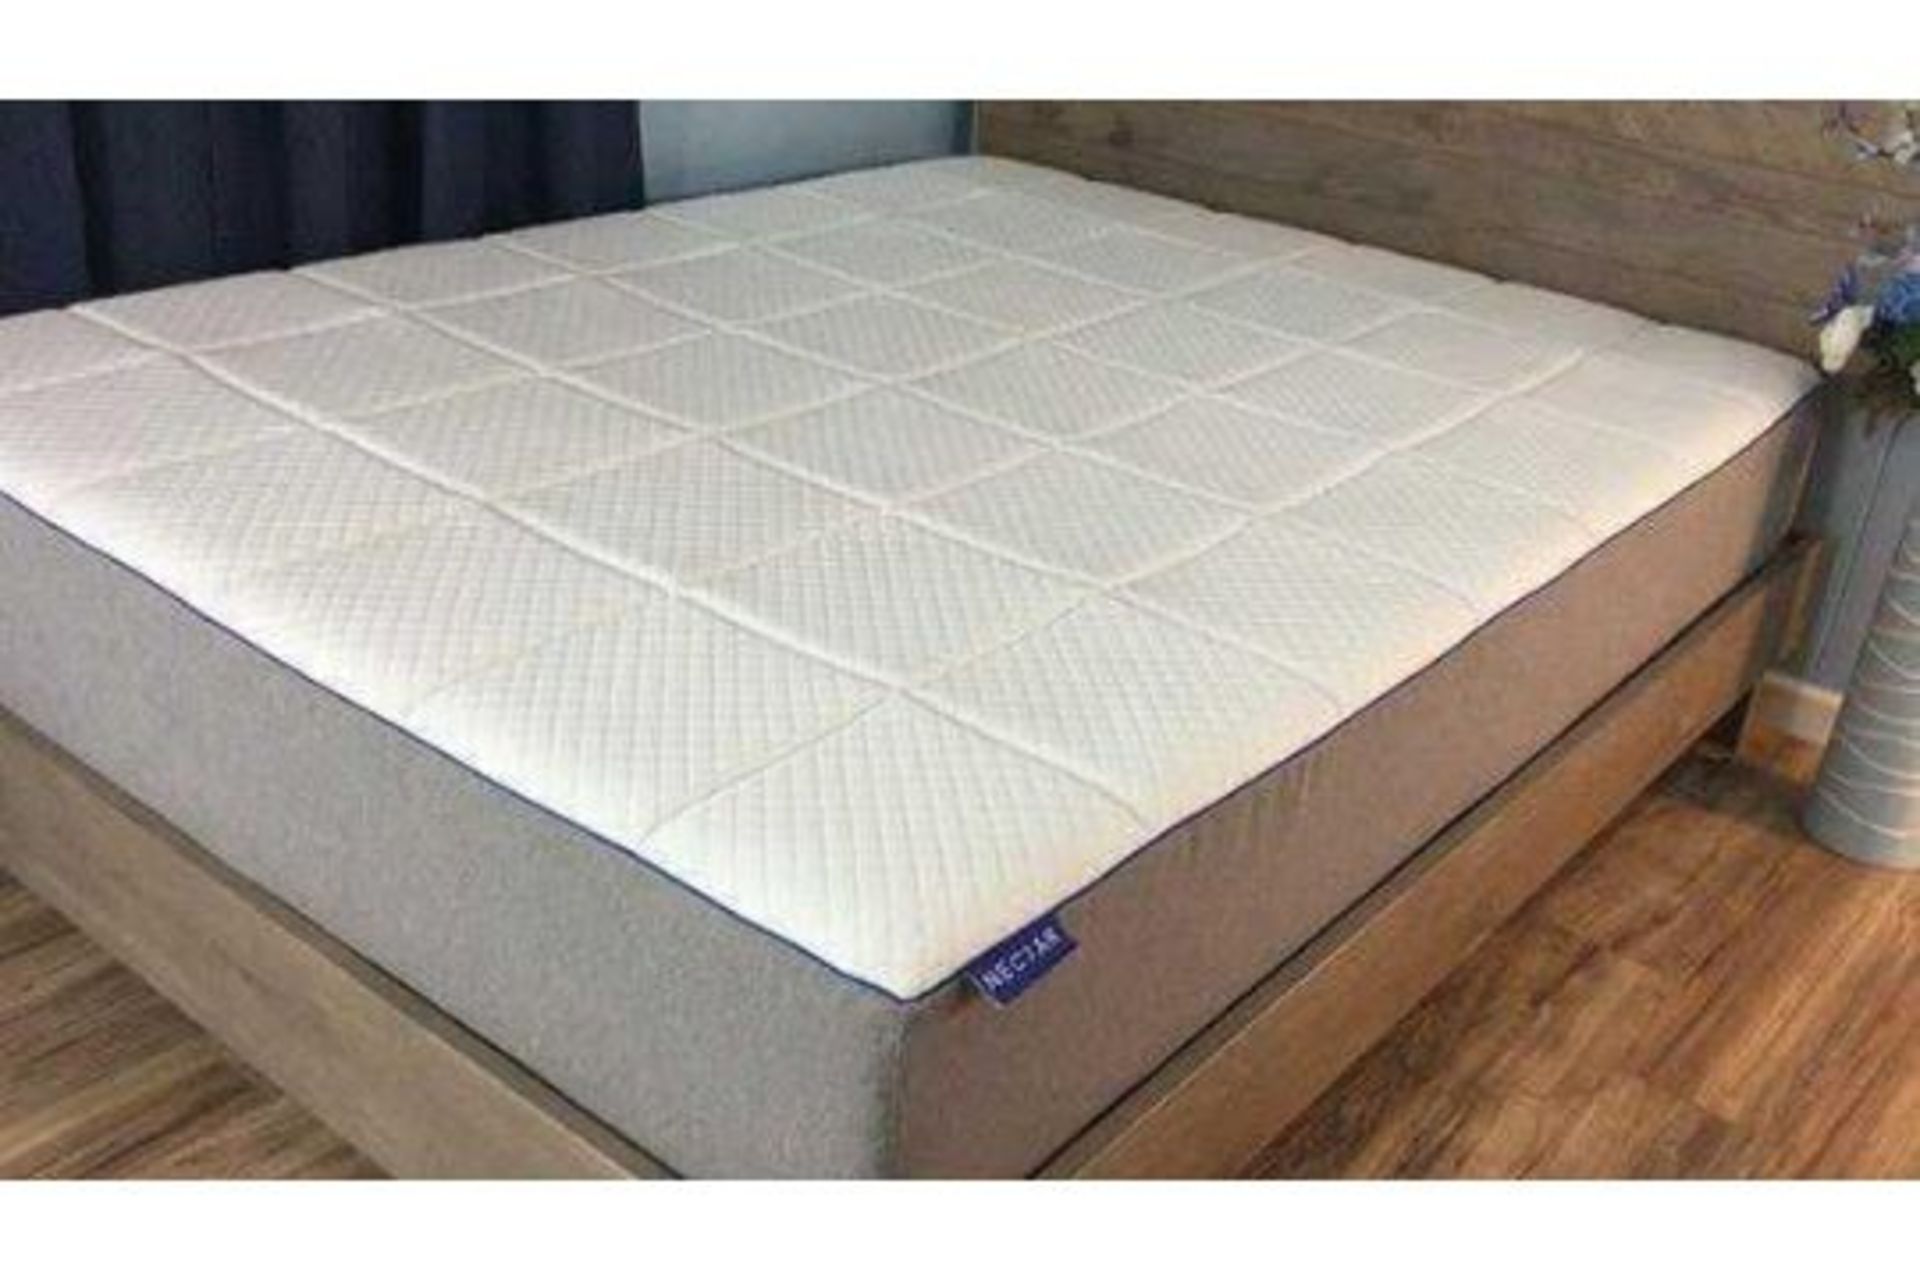 RRP £550 Bagged Nectar Double Pressure Releaving Memory Foam Mattress With 3-Layer Foam